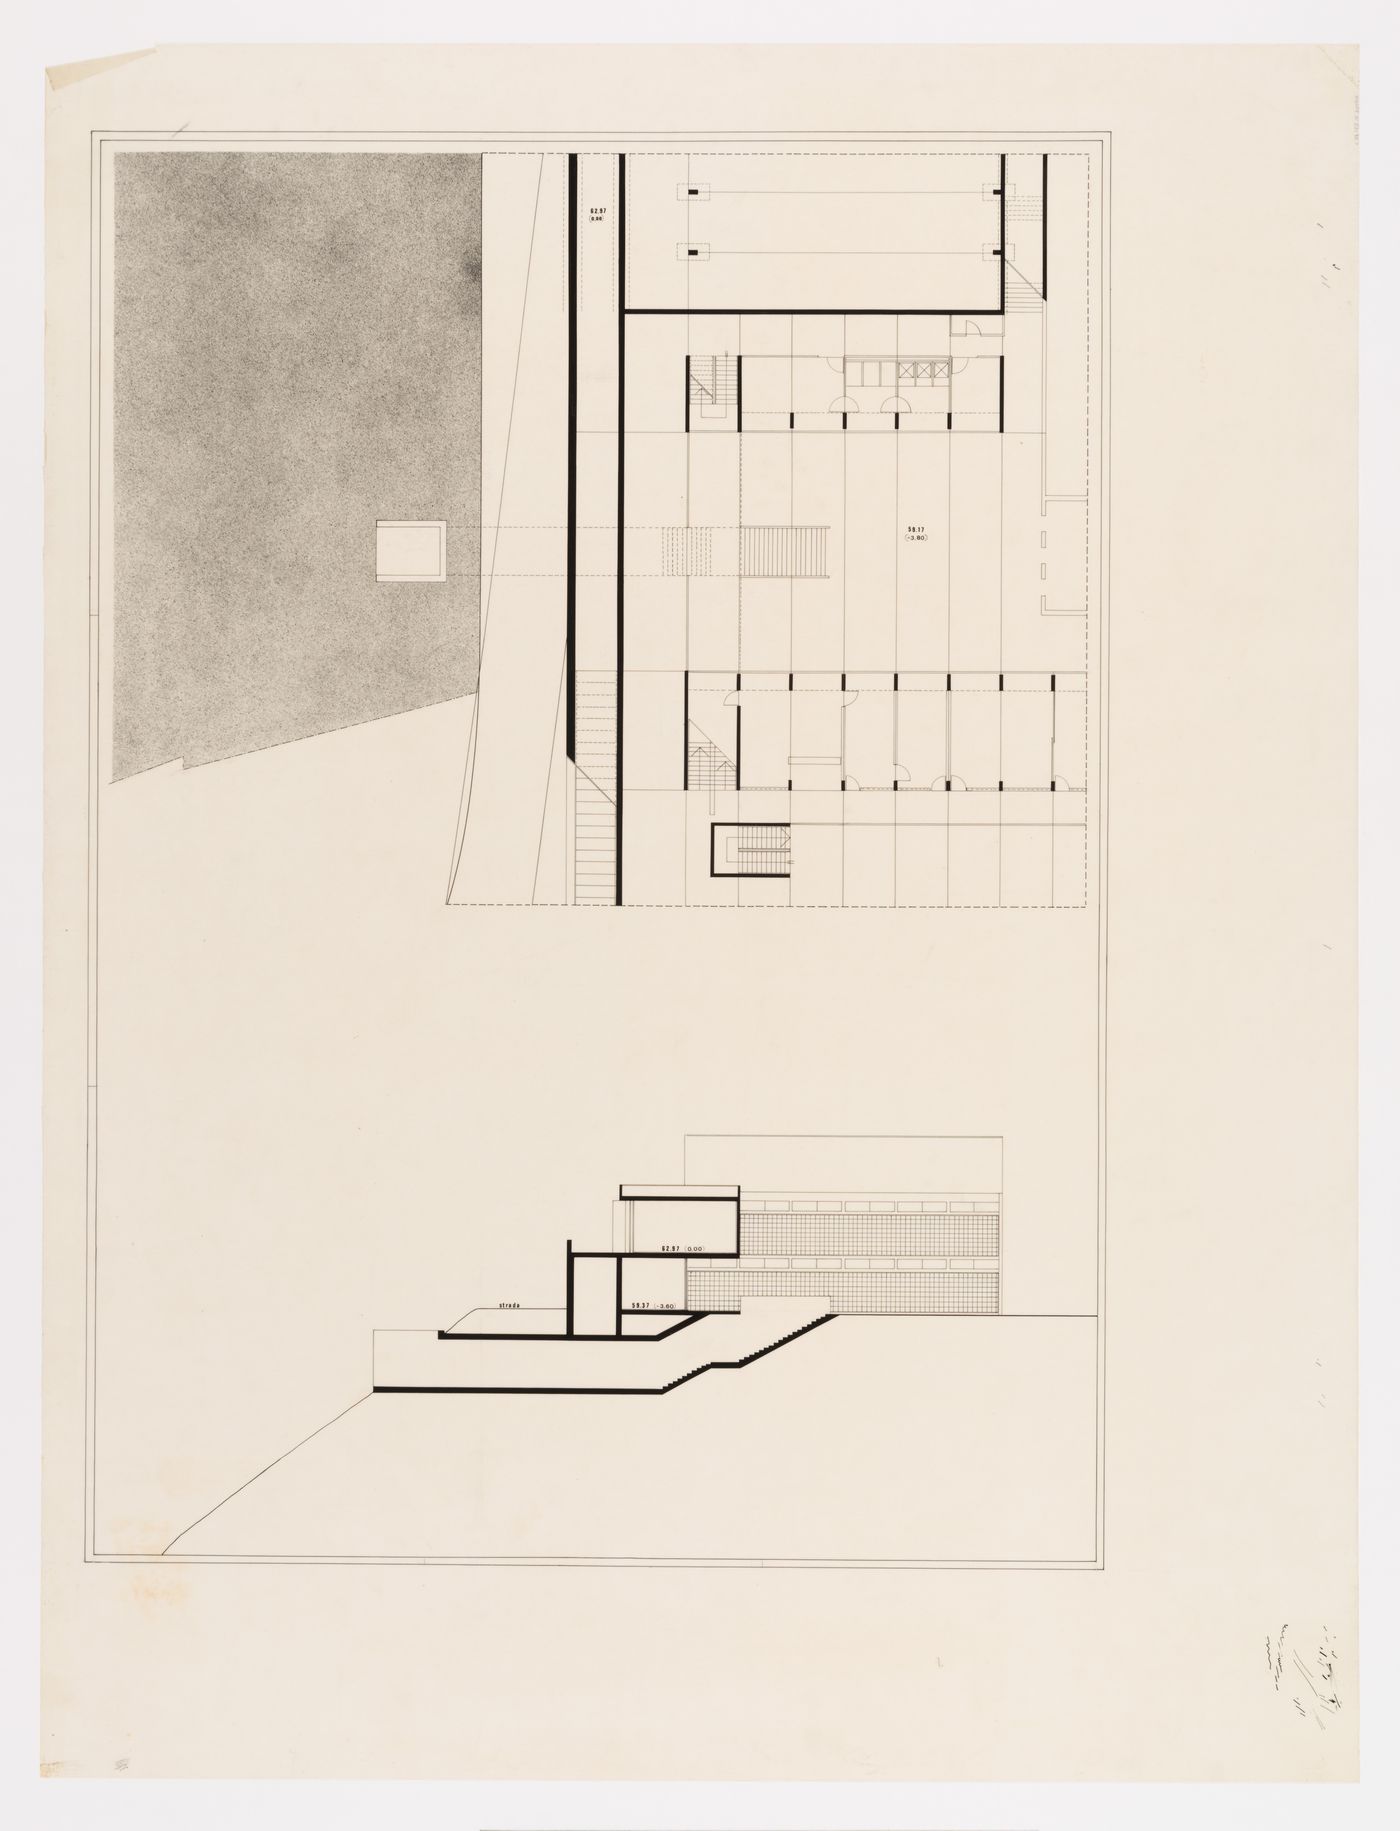 Plan and section, Scuola media a San Sabba, Trieste, Italy